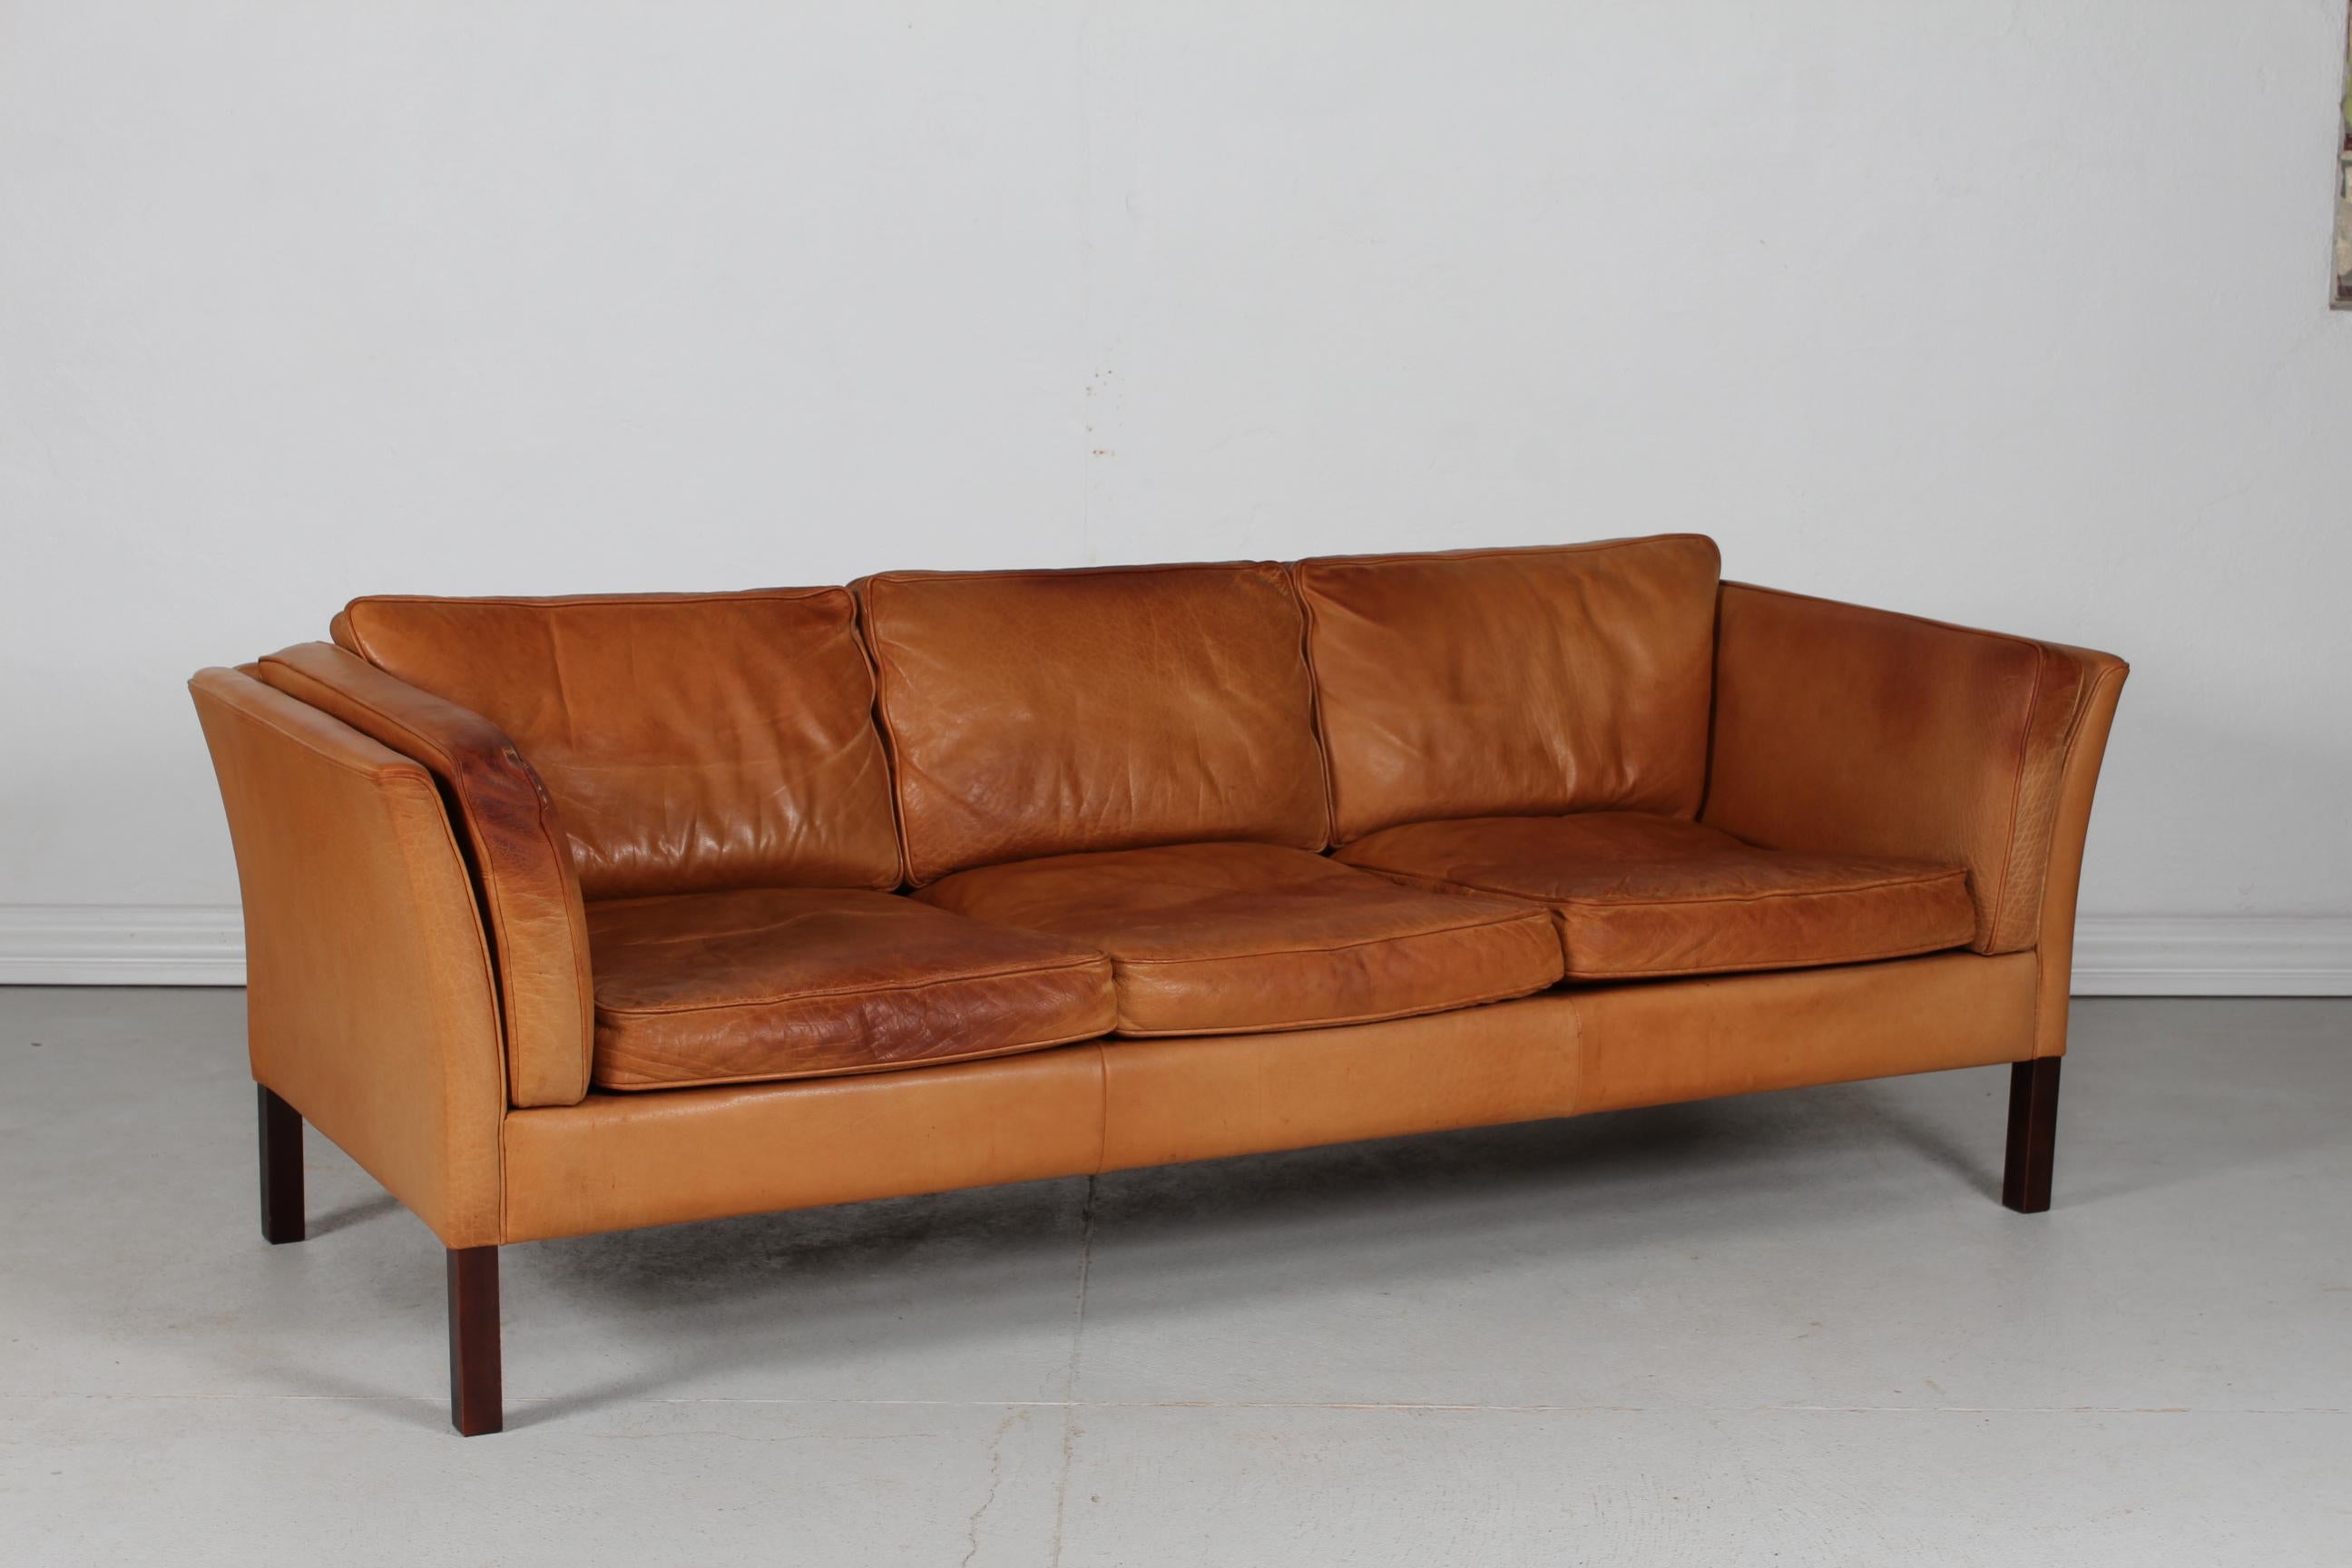 Danish vintage 3-seater sofa in the style of Børge Mogensen.
This sofa is manufactured by Stouby Møbelfabrik in Denmark in the 1970s
It's upholstered with the original cognac-colored leather with good patina. 
The square legs are made of dark